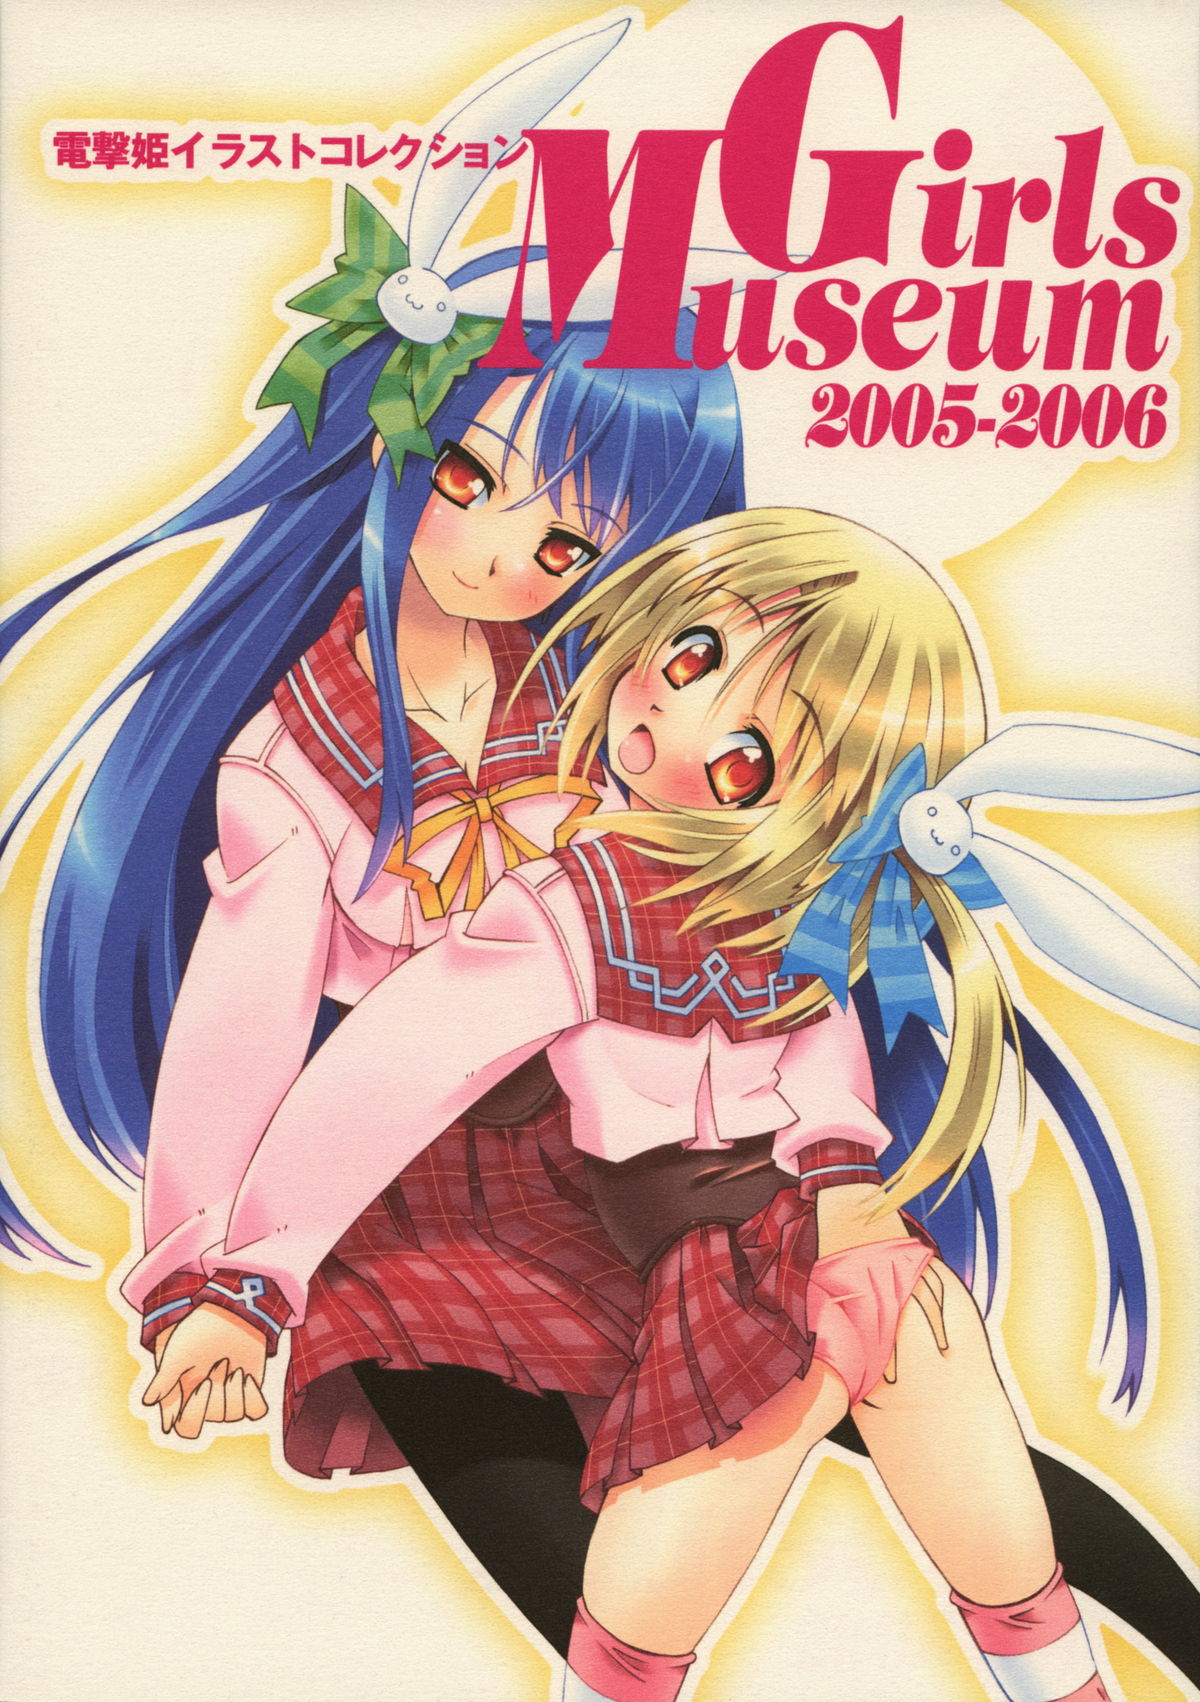 Dengeki-Hime Collection - Girls Museum 2005-2006 page 1 full